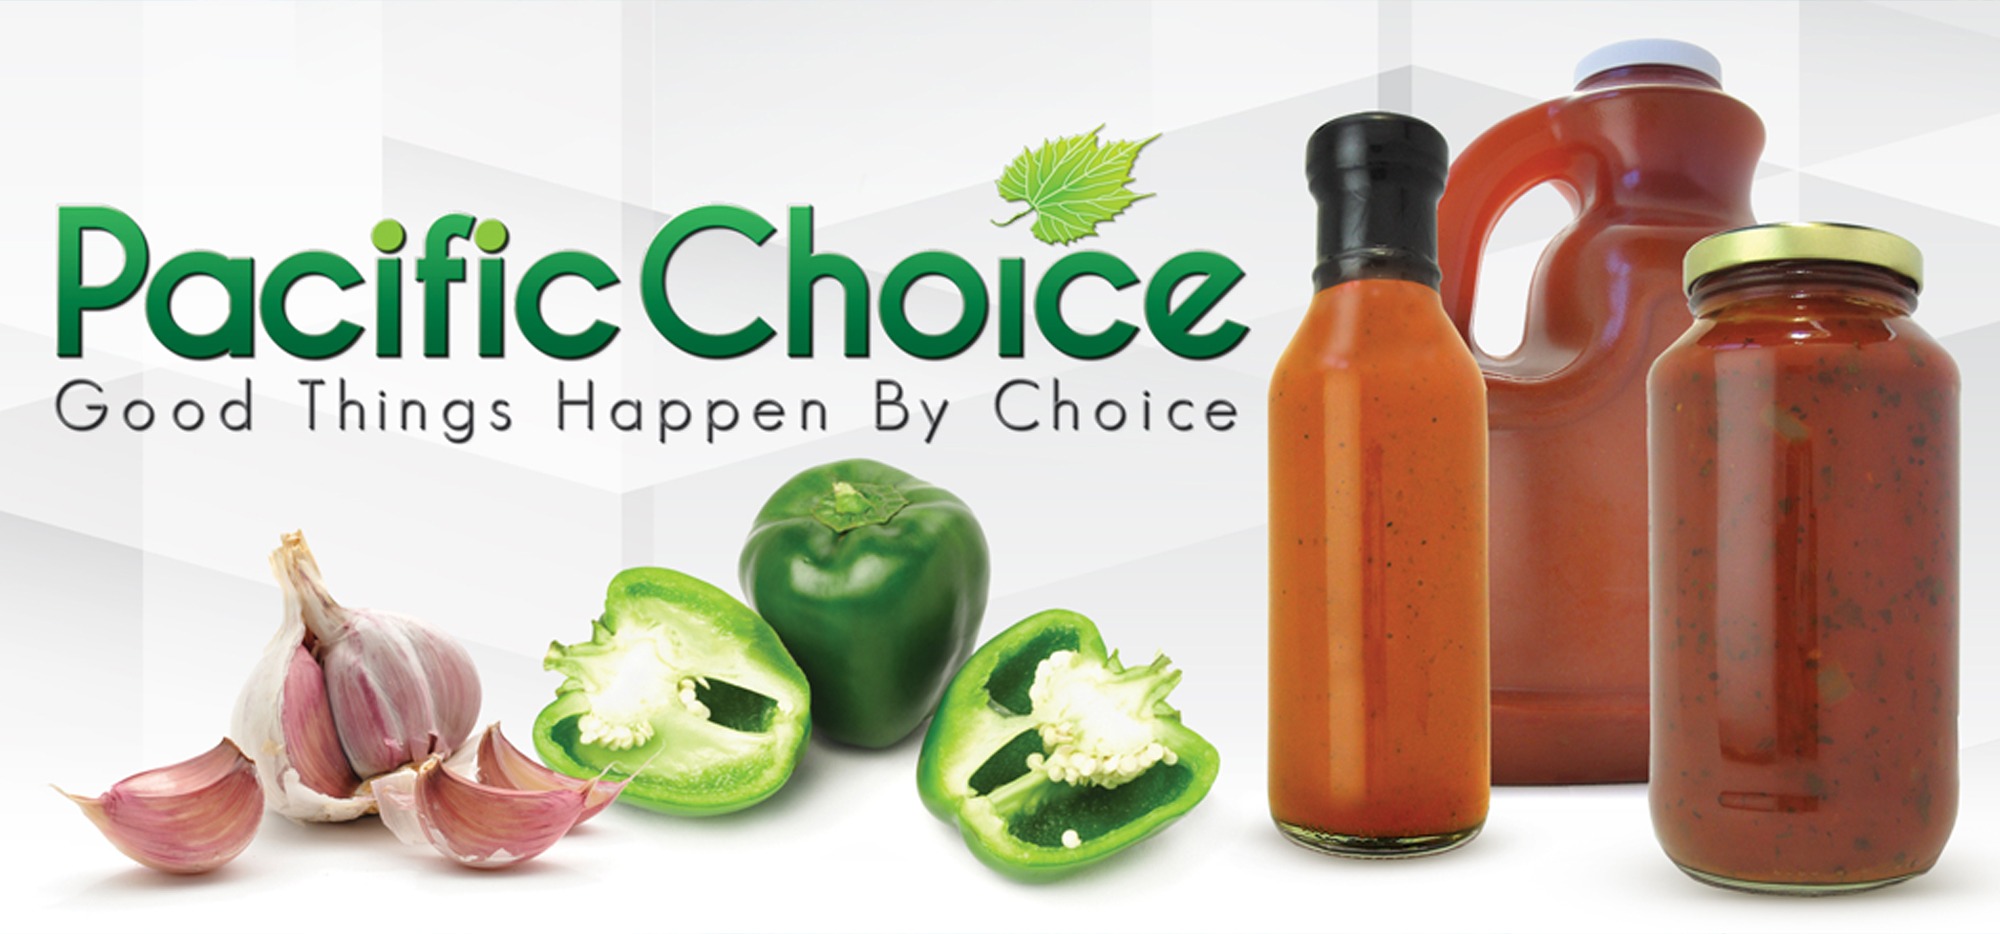 Pacific Choice Brand Inspiration by Octane Advertising Design